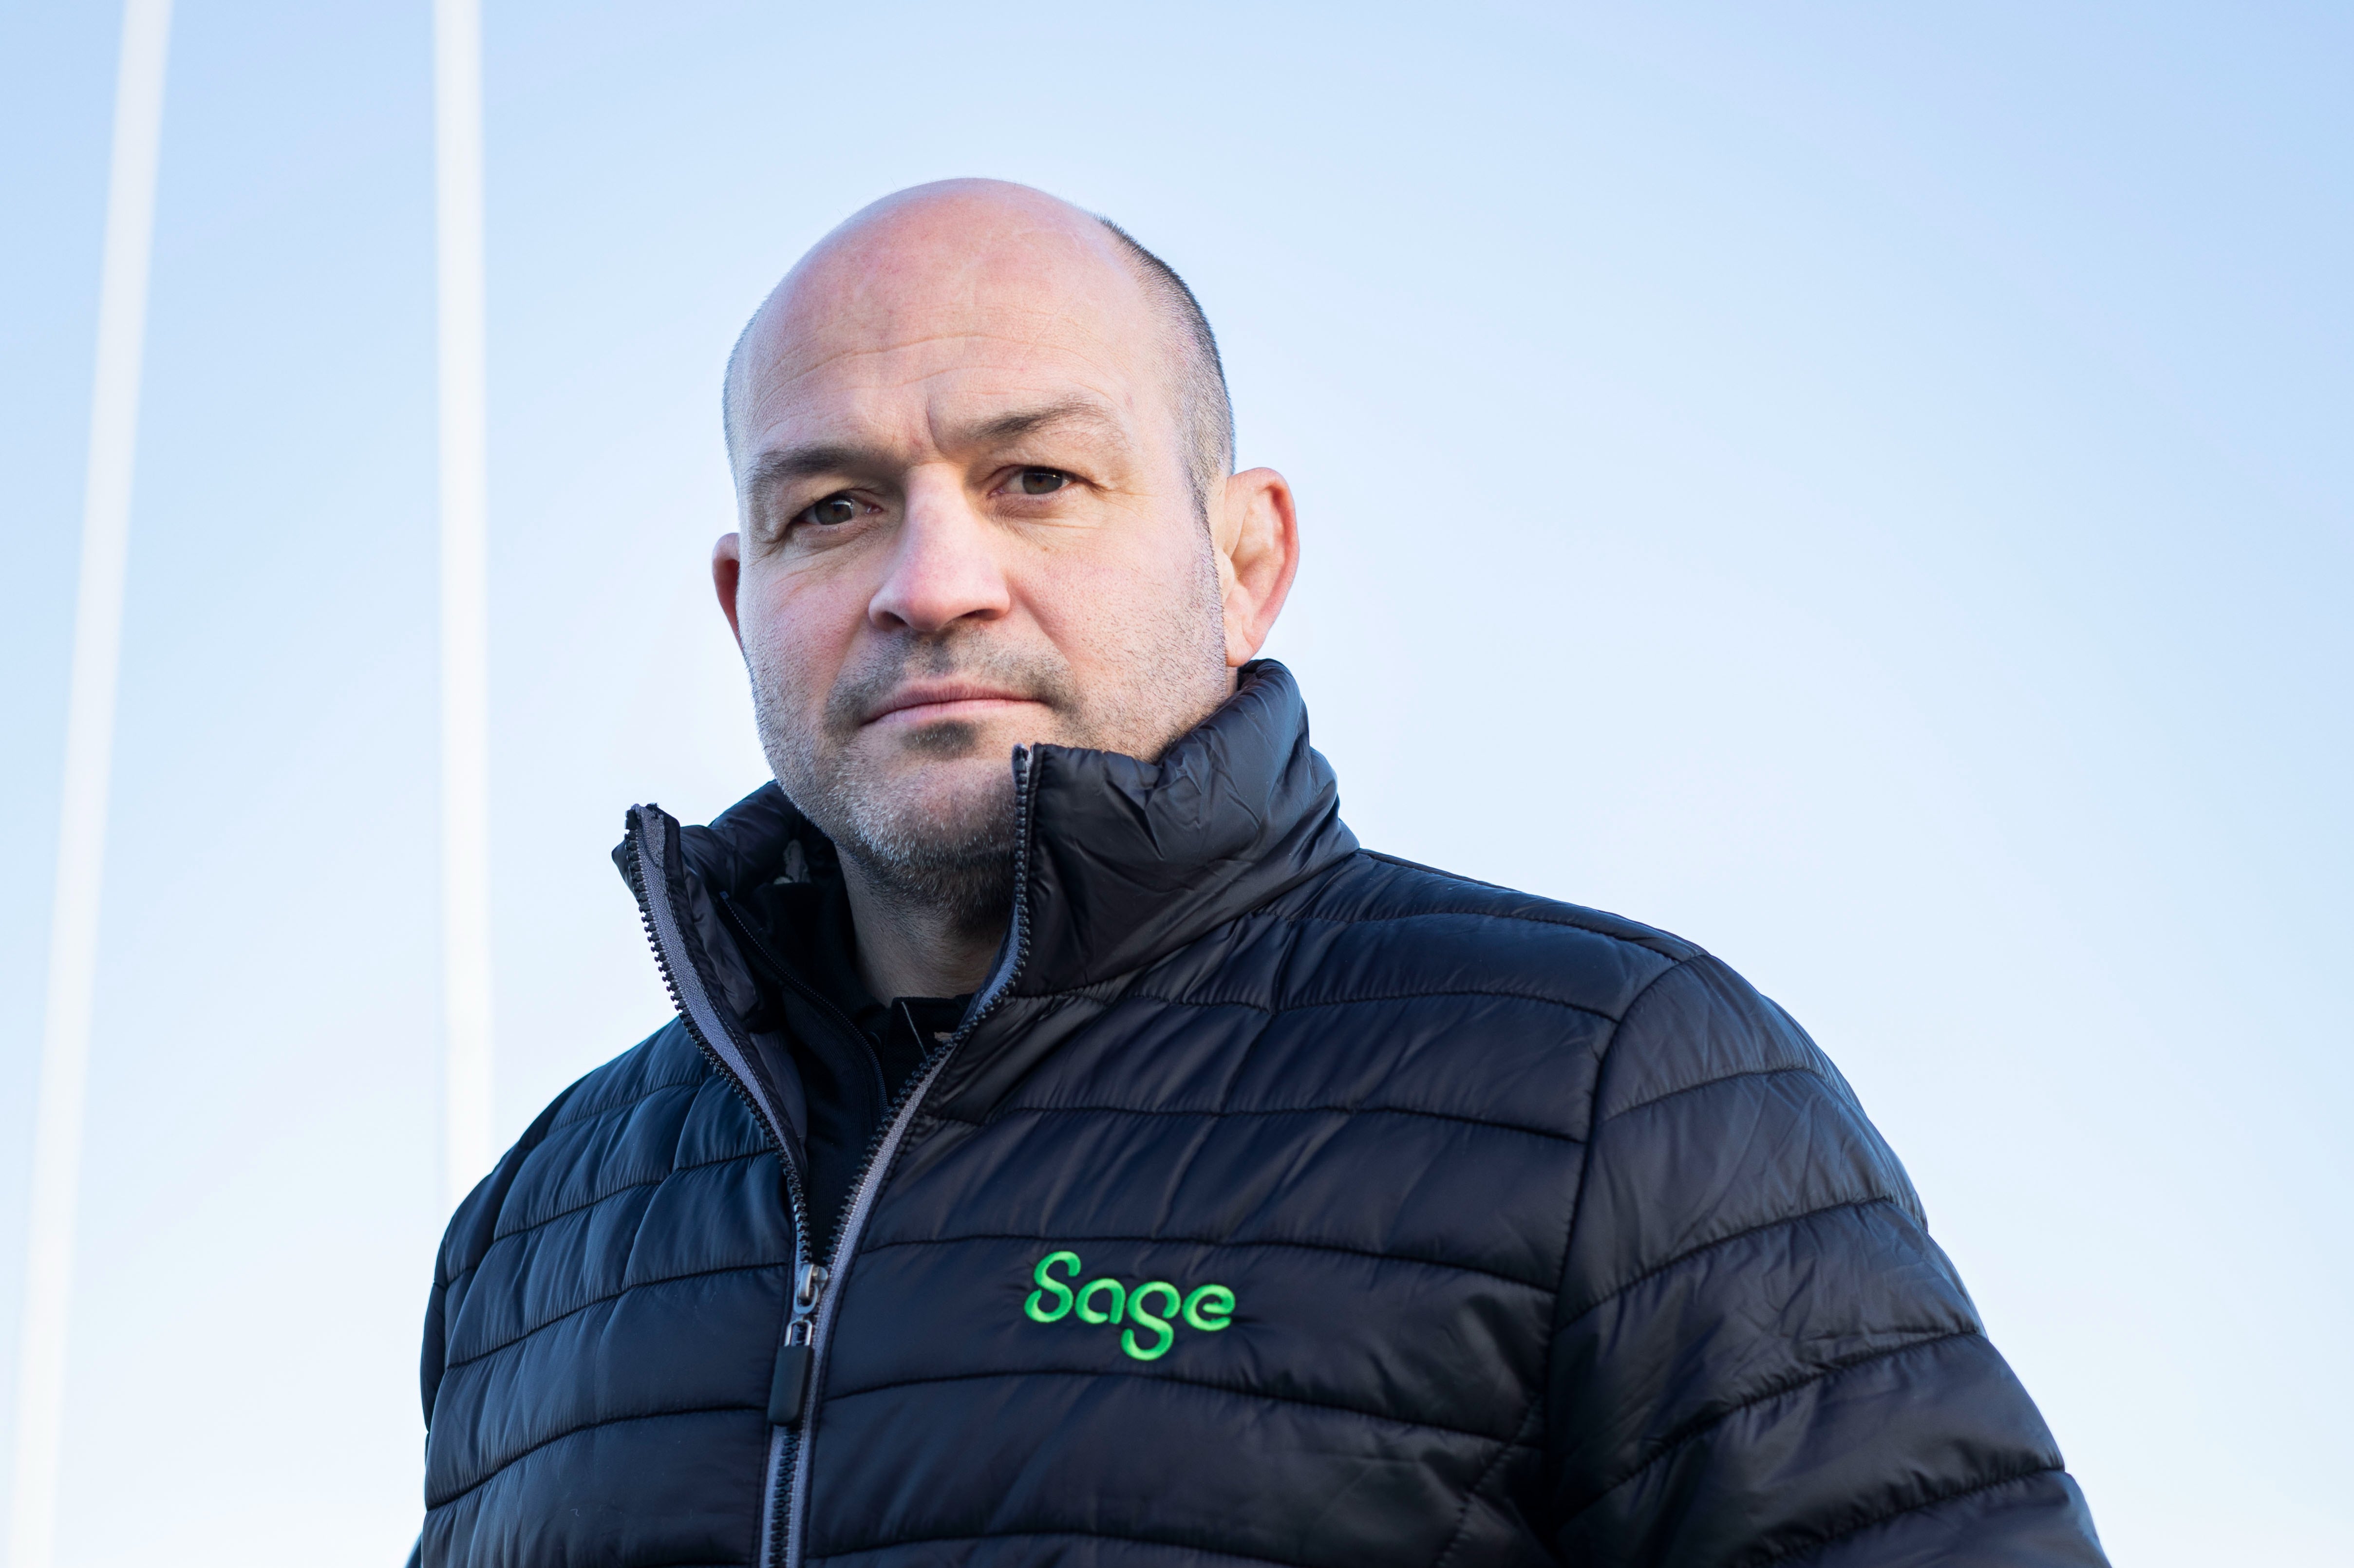 Former Ireland hooker Rory Best was speaking on behalf of Sage ahead of Saturday’s Six Nations clash with England